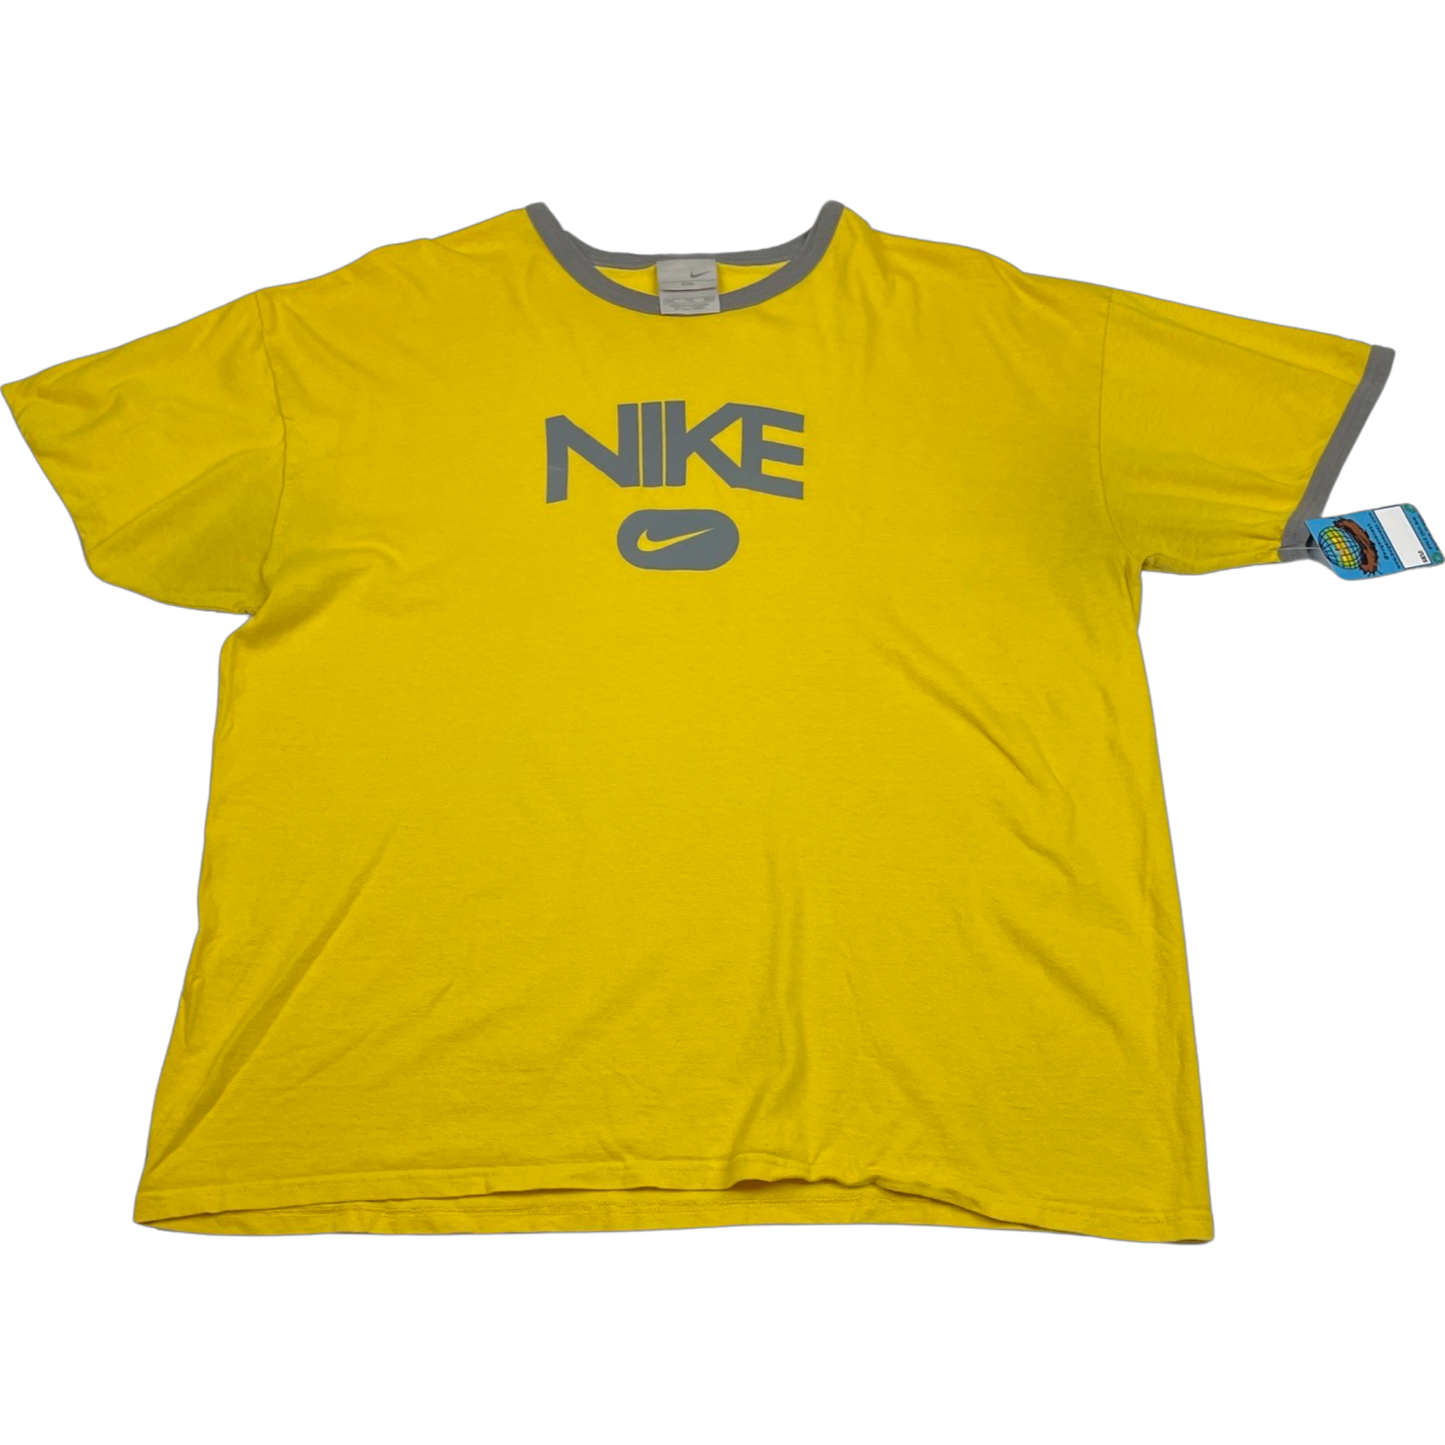 '00s Nike Spell Out Tee